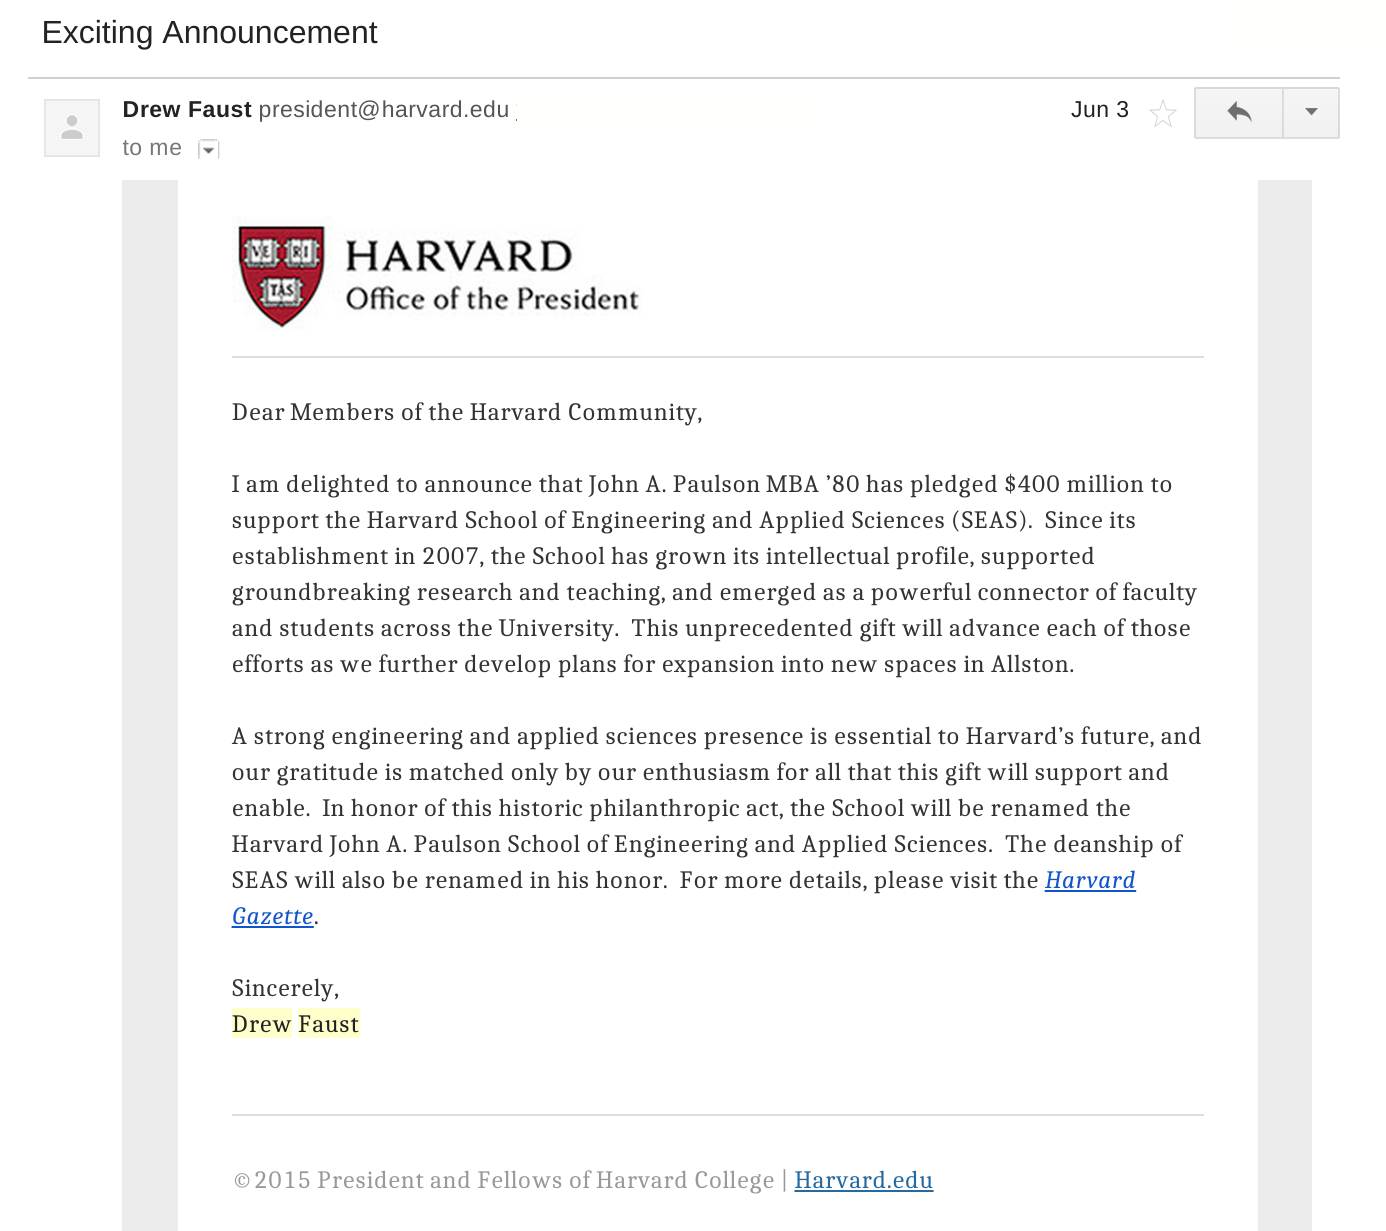 An email from Drew Faust, announcing the sale of the naming rights to the Harvard School of Engineering and Applied Sciences.